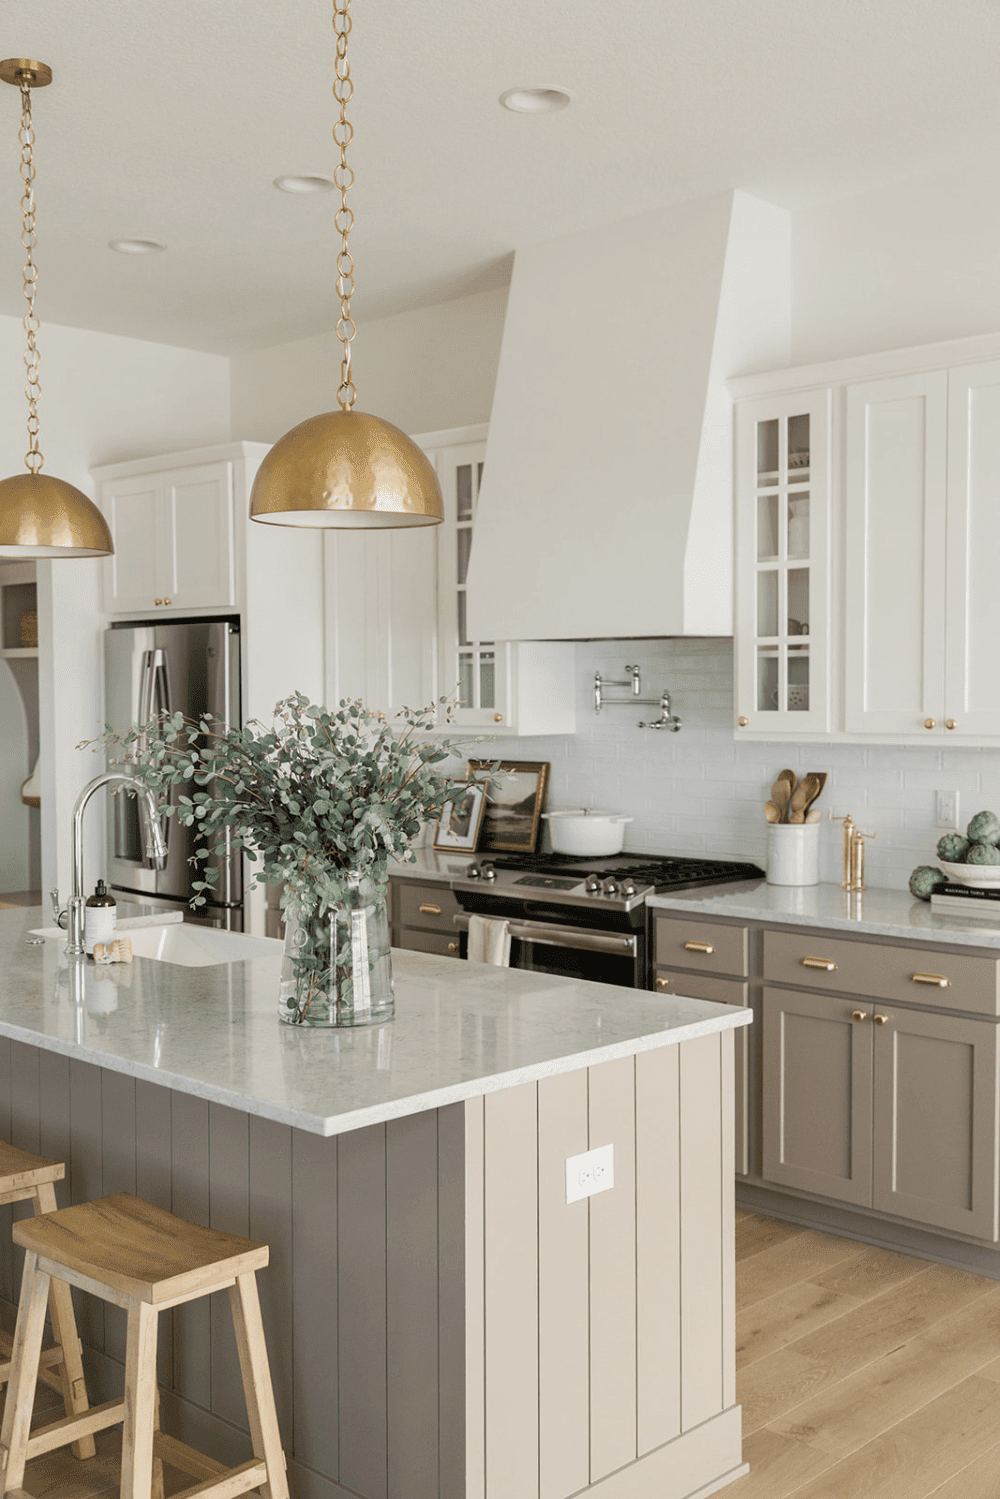 How to decorate your kitchen using the
kitchen design ideas